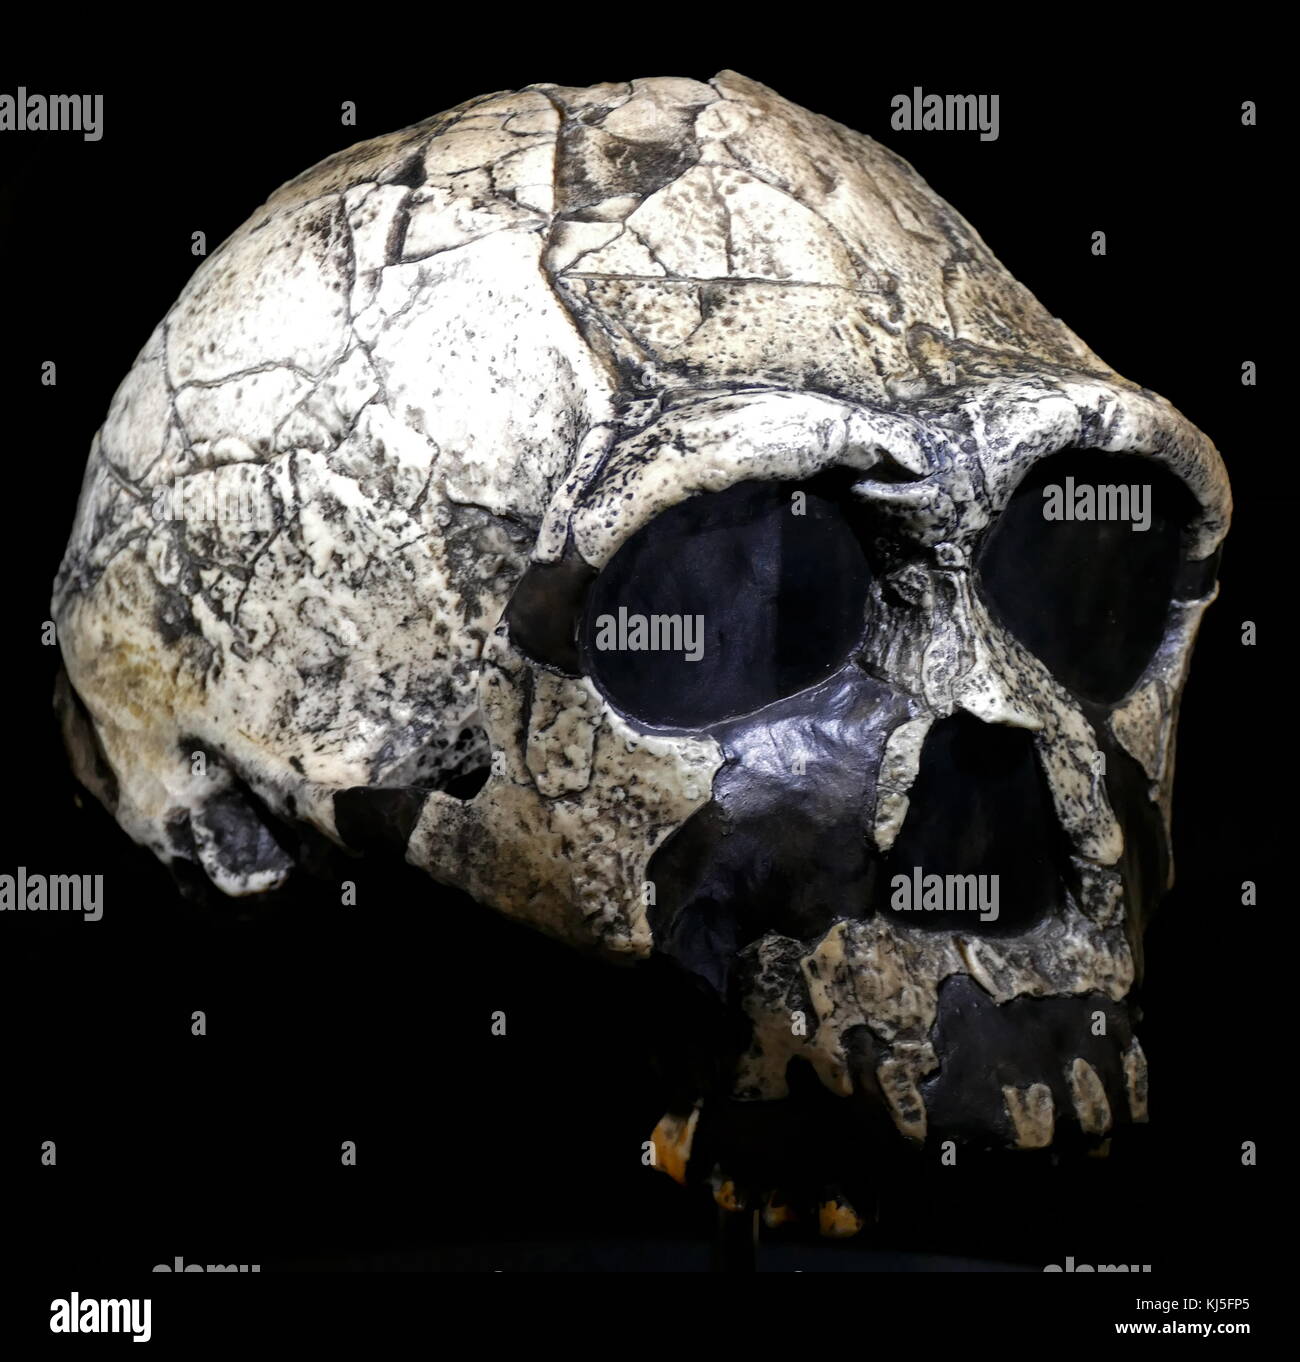 Skull of an early homo sapiens found in Eastern Europe. Homo rudolfensis (also Australopithecus rudolfensis) is an extinct species of the Hominini tribe known only through a handful of representative fossils, the first of which was discovered by Bernard Ngeneo, a member of a team led by anthropologist Richard Leakey and zoologist Meave Leakey in 1972, at Koobi Fora on the east side of Lake Rudolf (now Lake Turkana) in Kenya. Stock Photo